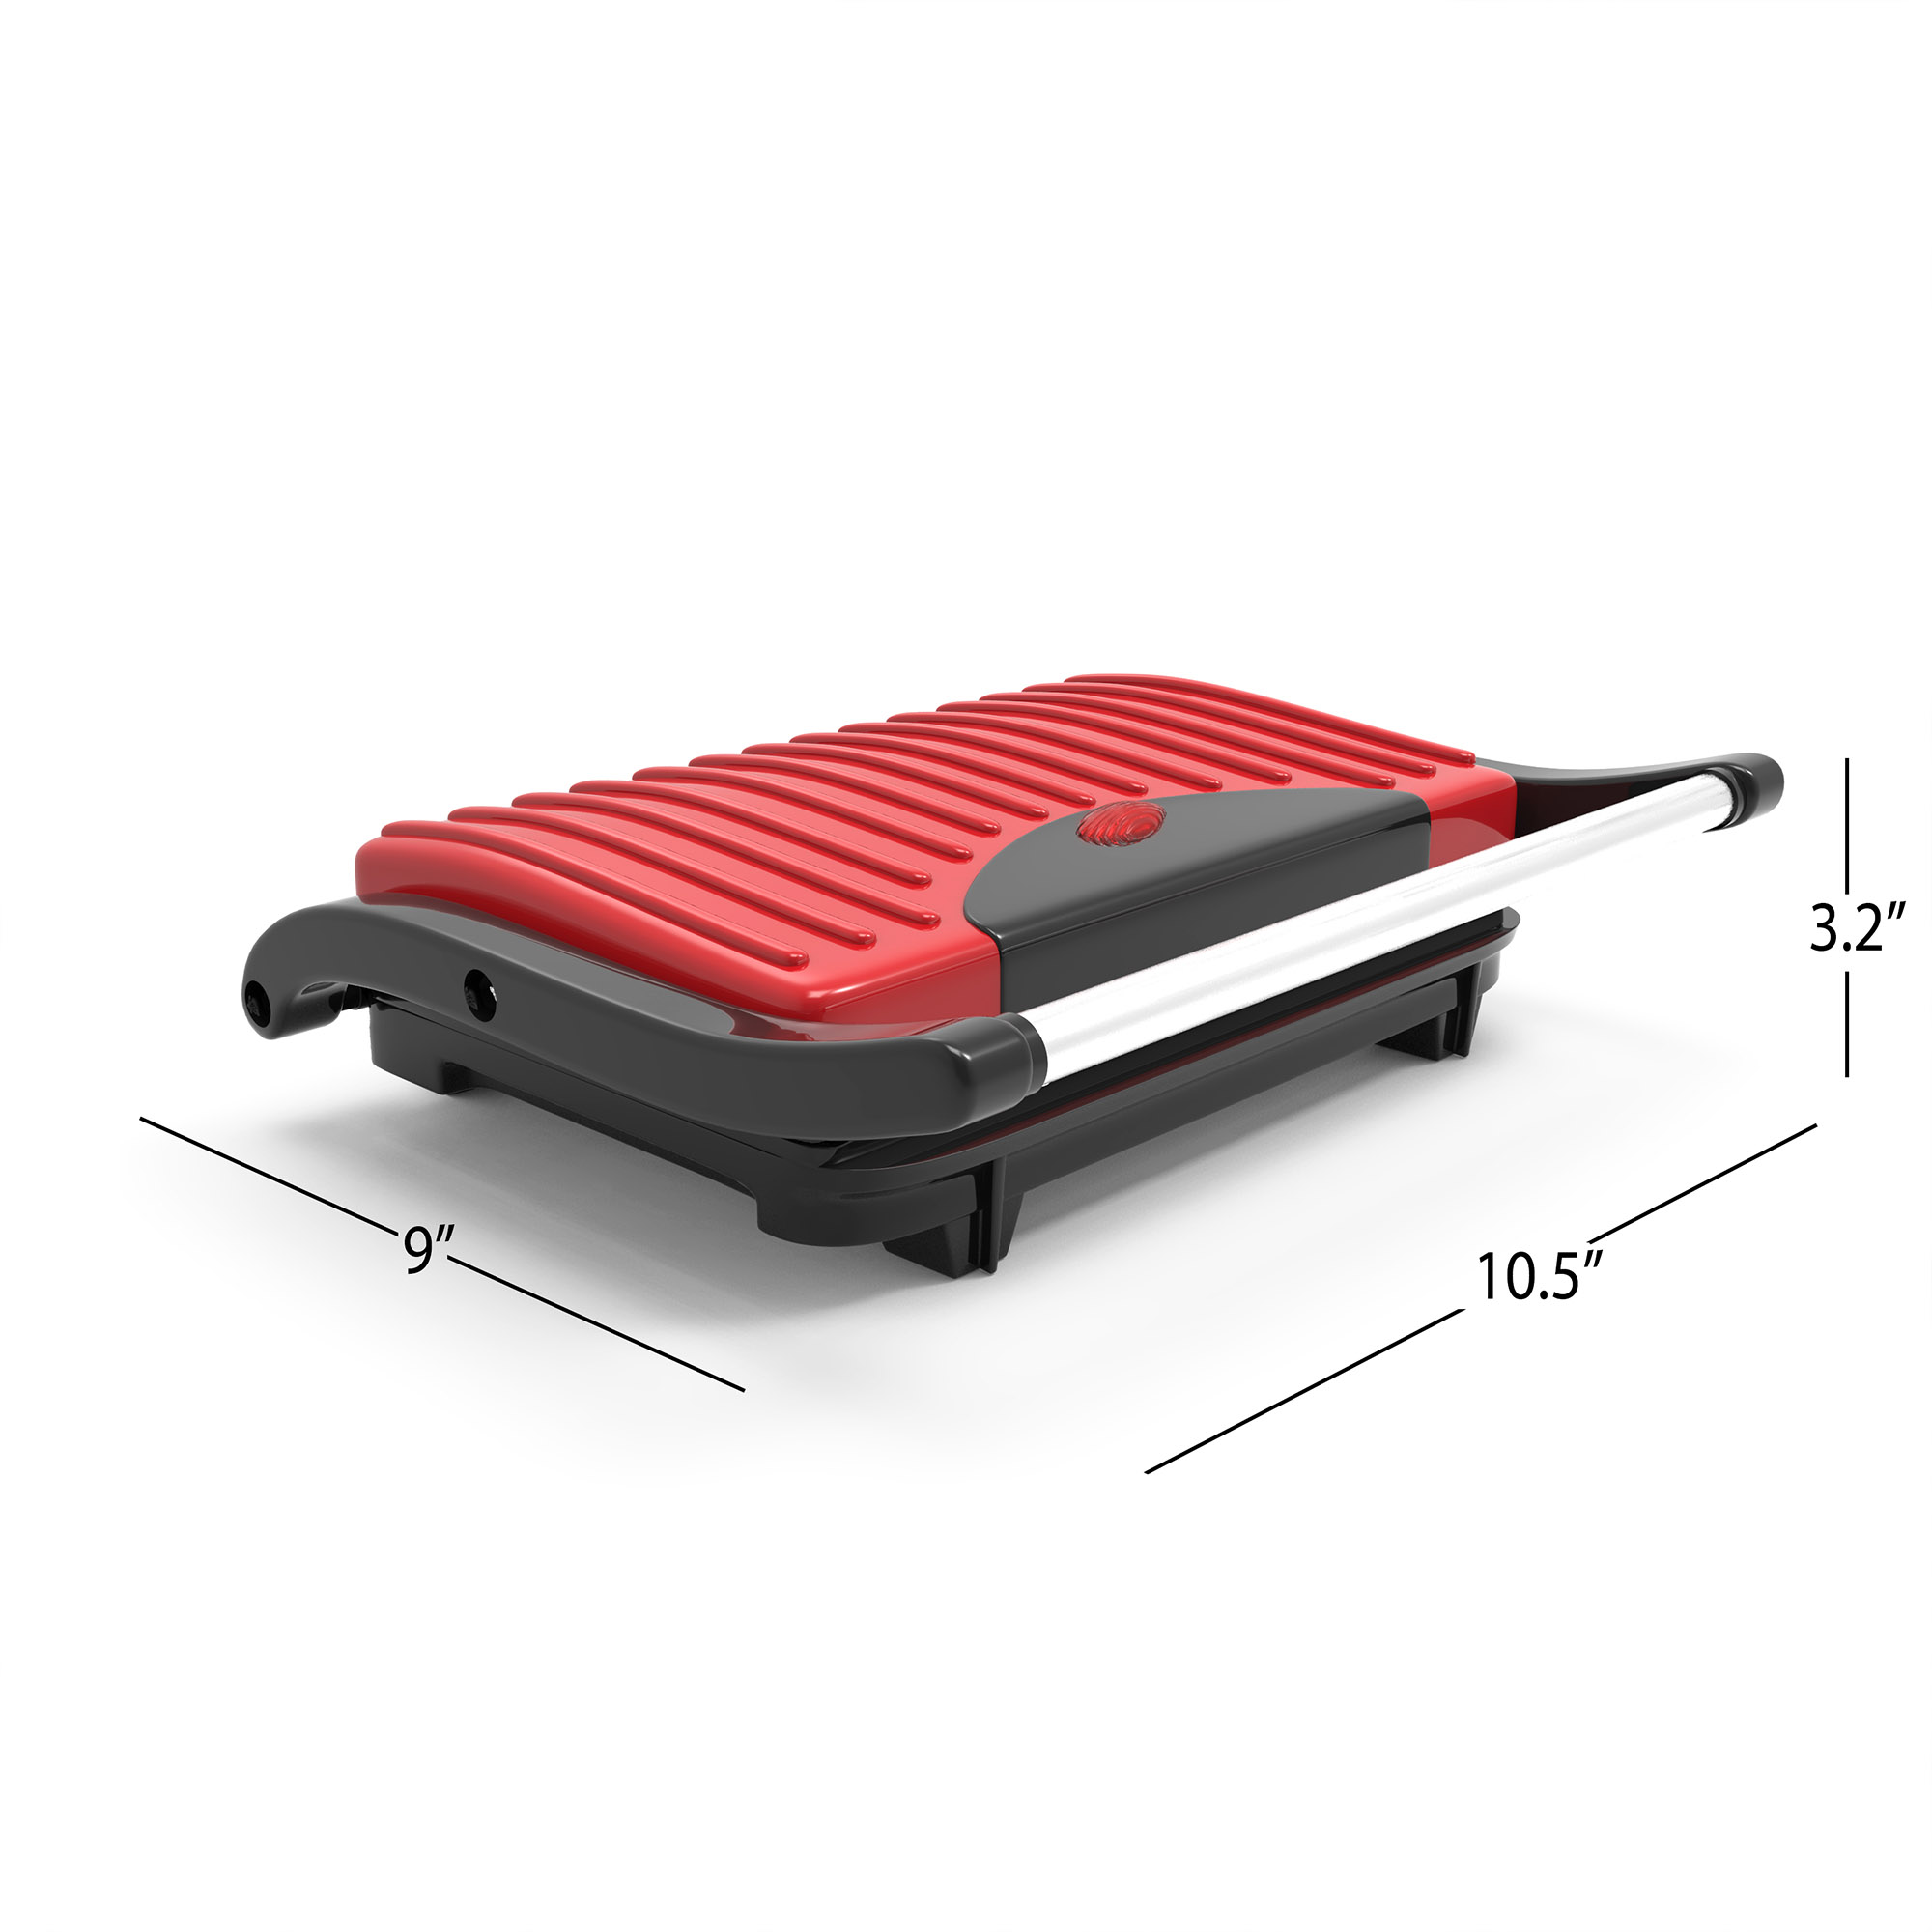 Chef Buddy Non-Stick Grill and Panini Press, Red - image 3 of 8